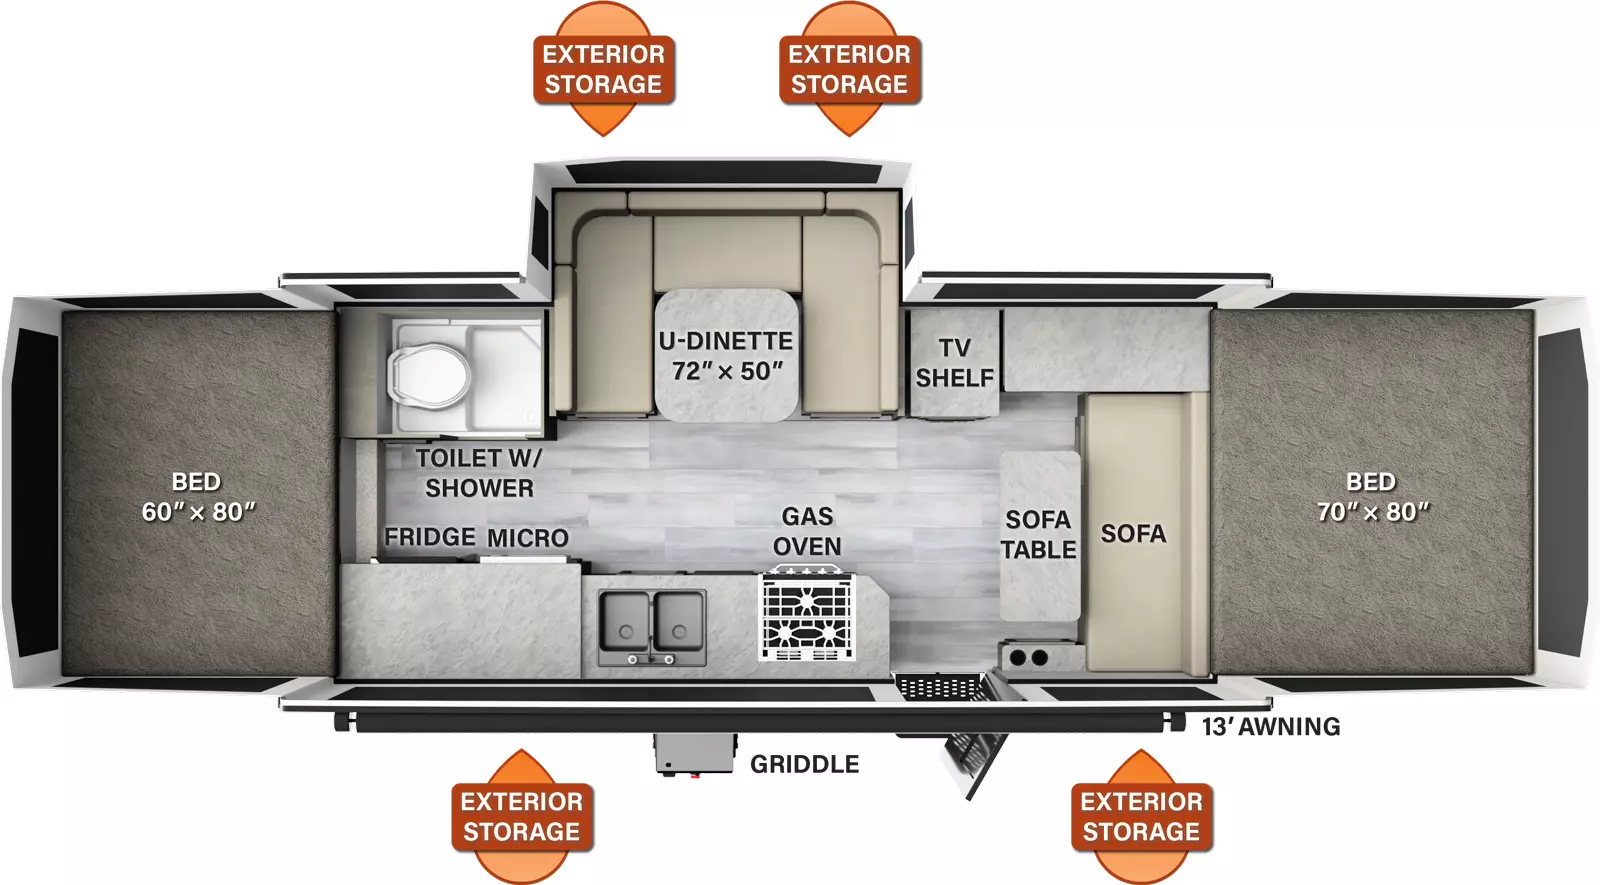 The HW29SC has one slide out on the off-door side and one entry door. Exterior features include a 13 foot awning, griddle, and exterior storage on both sides. Interior layout from front to back: front tent bed; sofa, sofa table, cabinet, and TV shelf; off-door side u-dinette slideout and toilet with shower; door side gas oven, sink and cabinet with microwave and refrigerator; rear tent bed. 